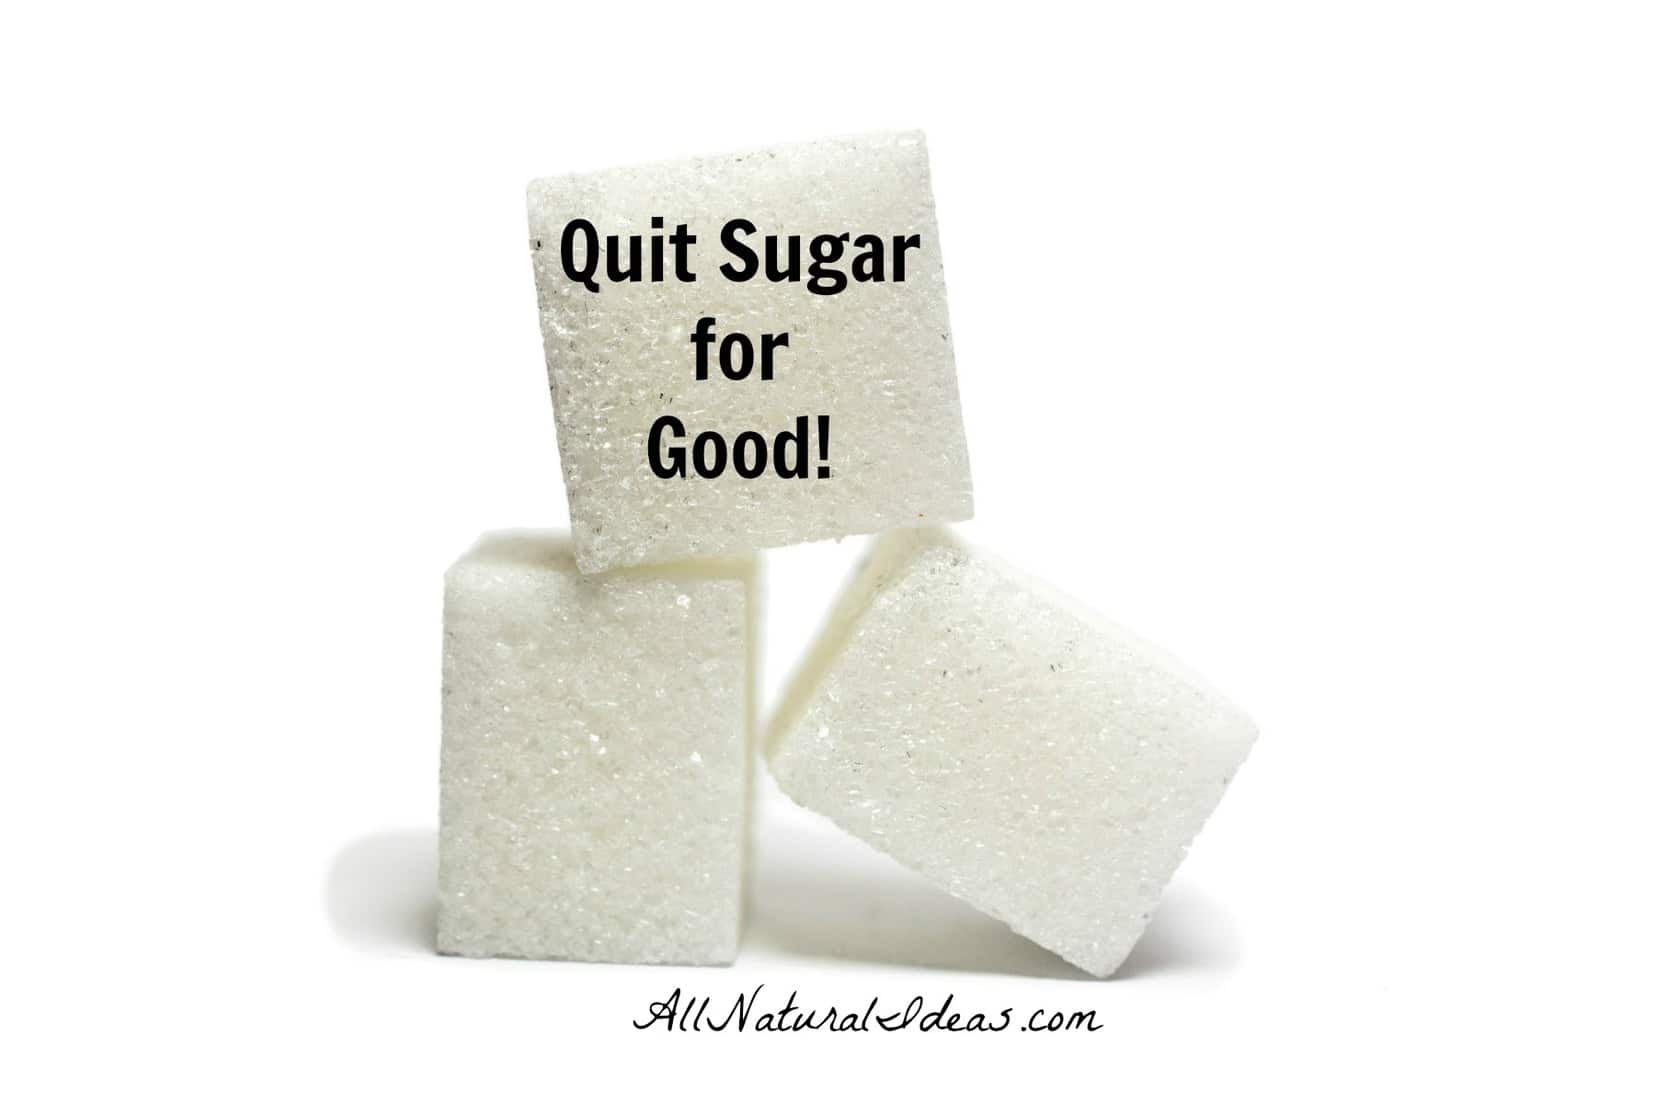 Quit sugar addiction for good and detox